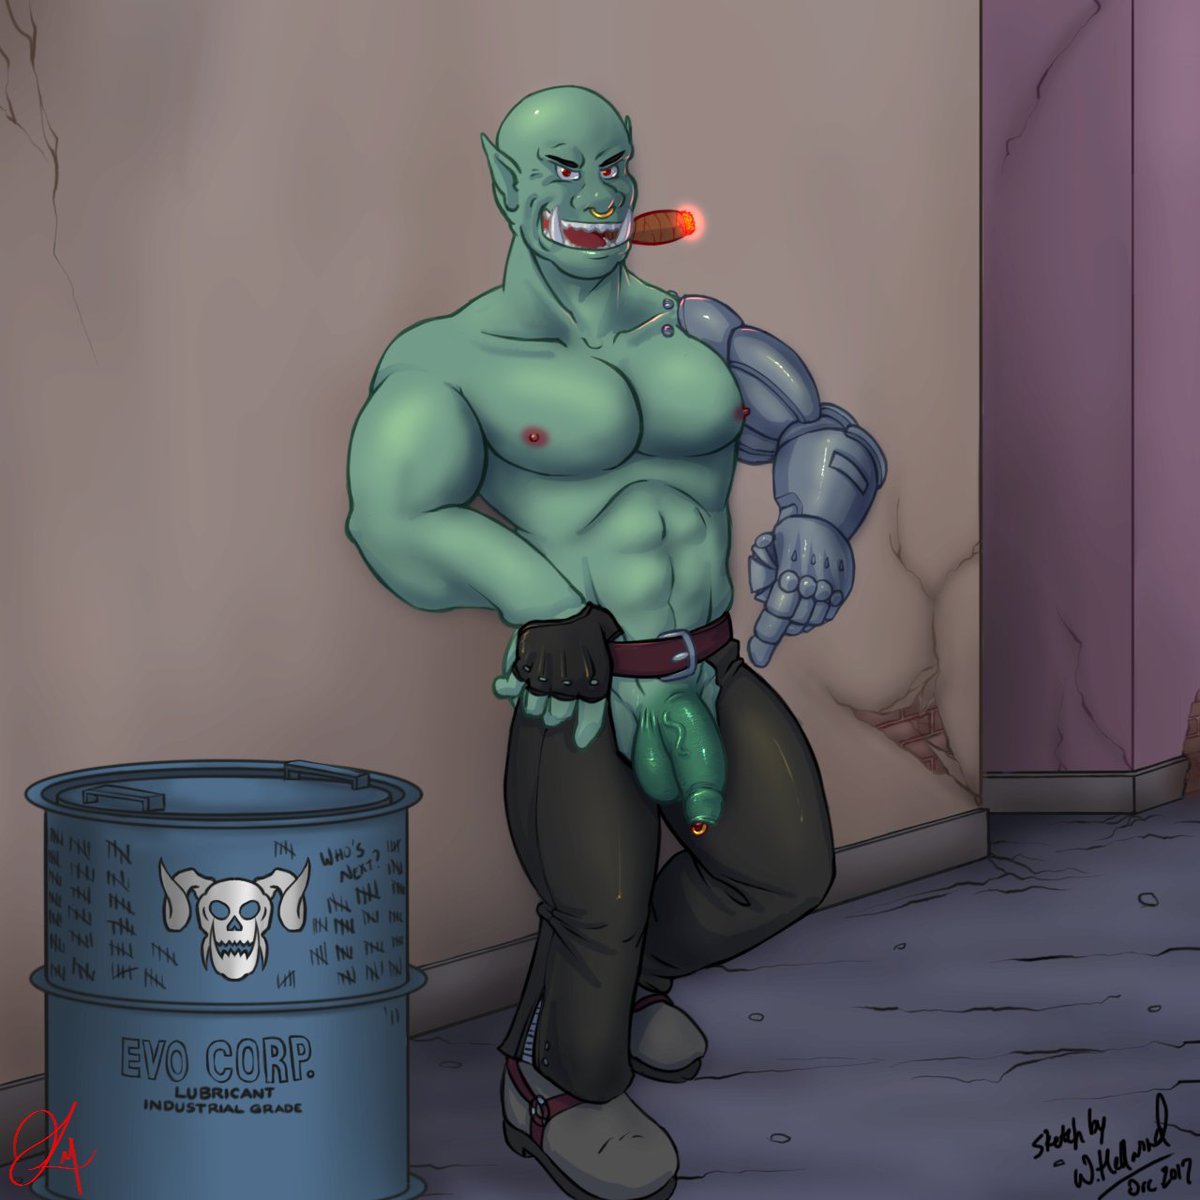 2. Next is Monty, an ork street samurai and bouncer for local bars including the spectacular Dante's Inferno topside, and the more seedy Pierced Hind down in the bowels of the Ork Underground.(art:  @kumattoz; original linework by me)